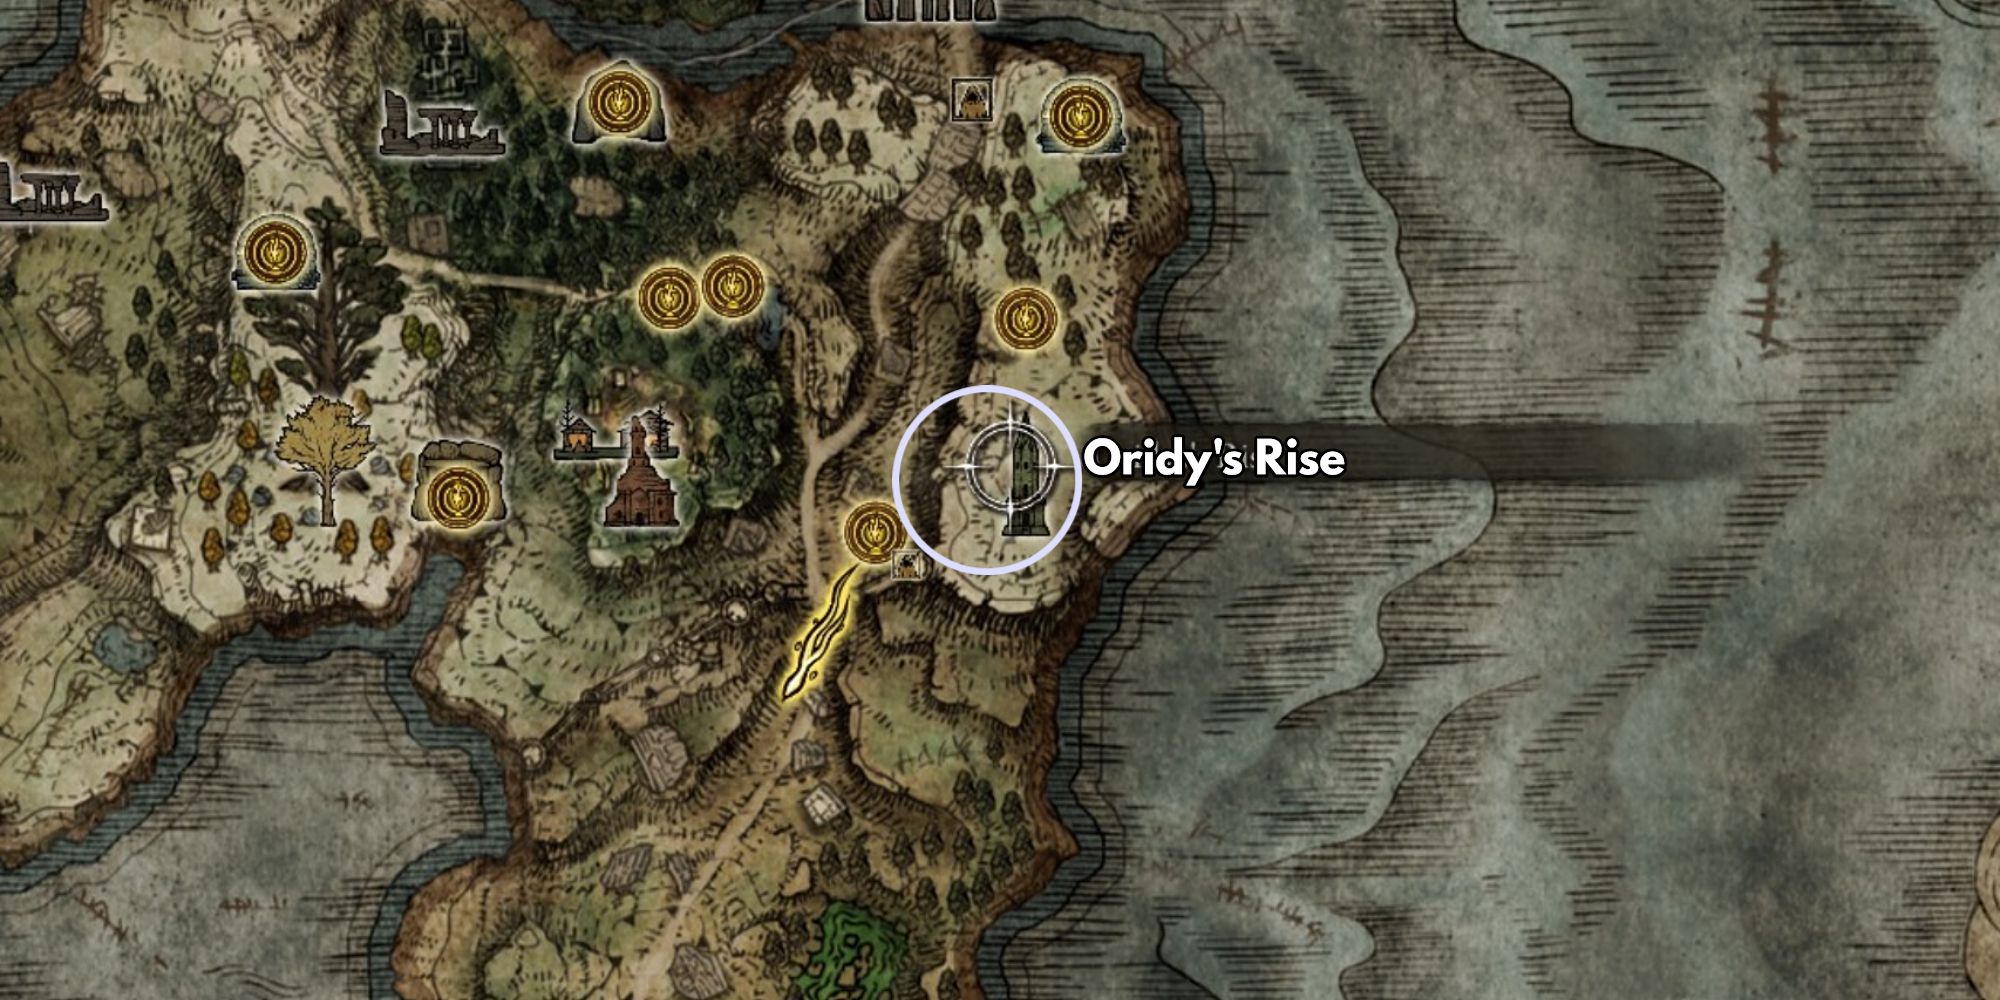 elden ring oridys rise on the map